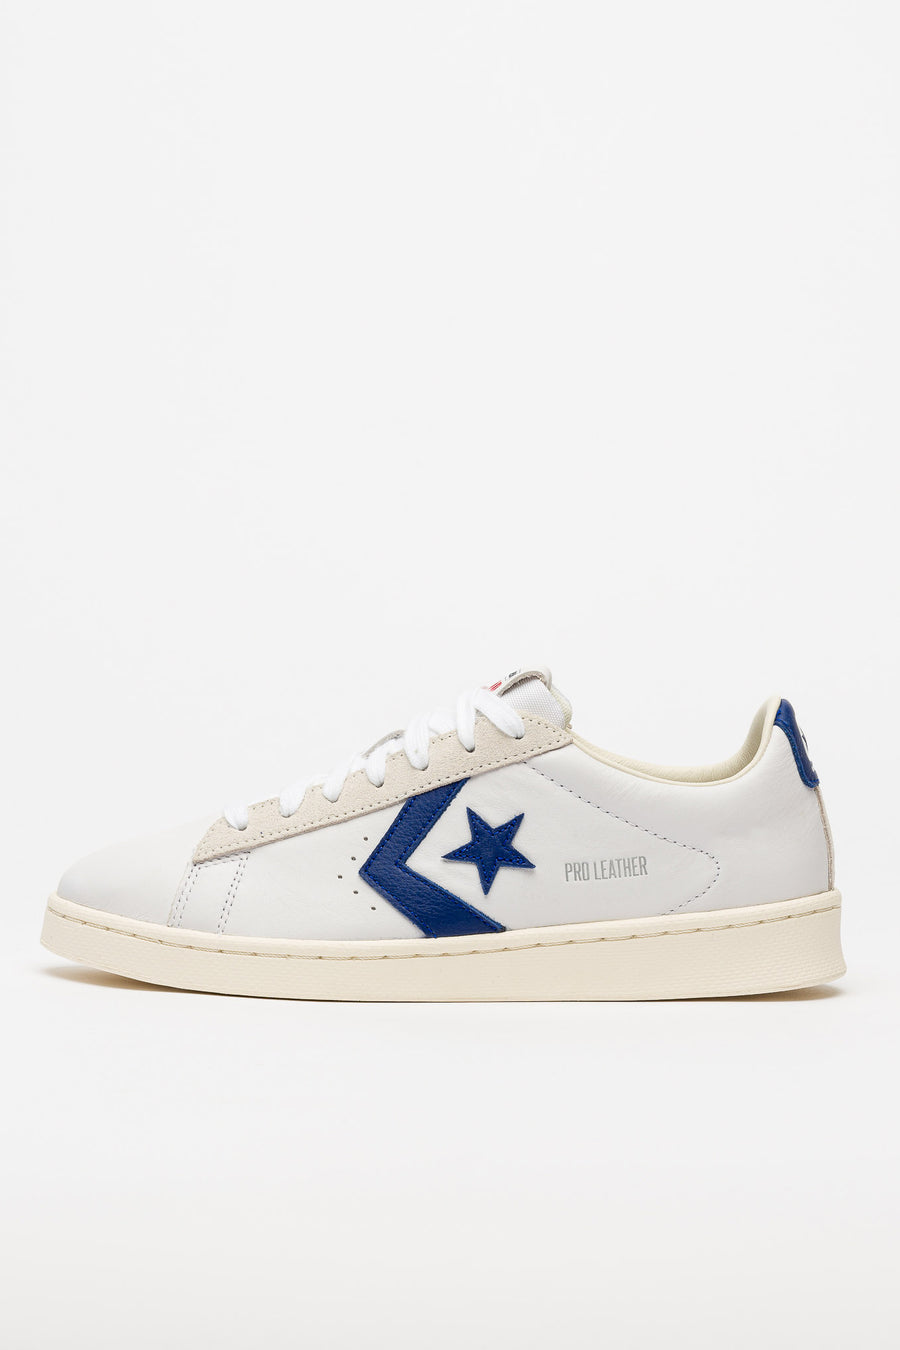 converse ox pro leather